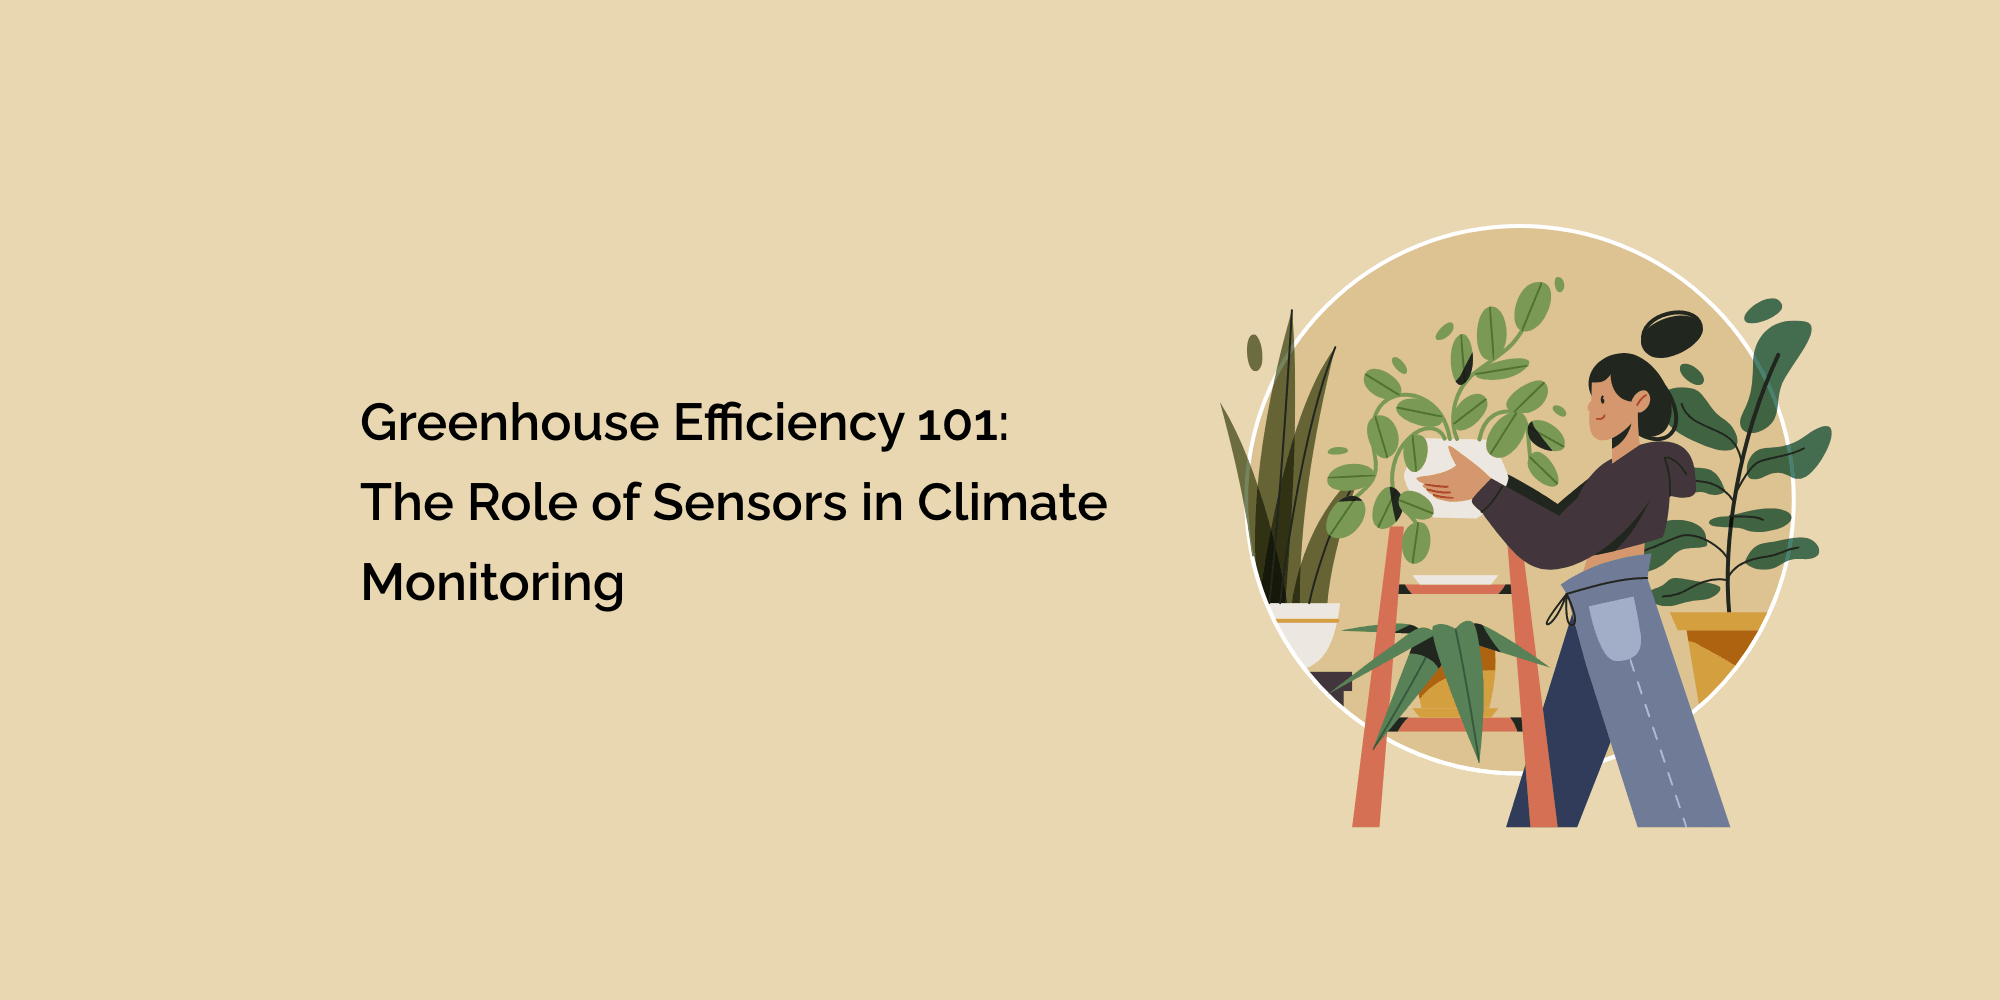 Greenhouse Efficiency 101: The Role of Sensors in Climate Monitoring